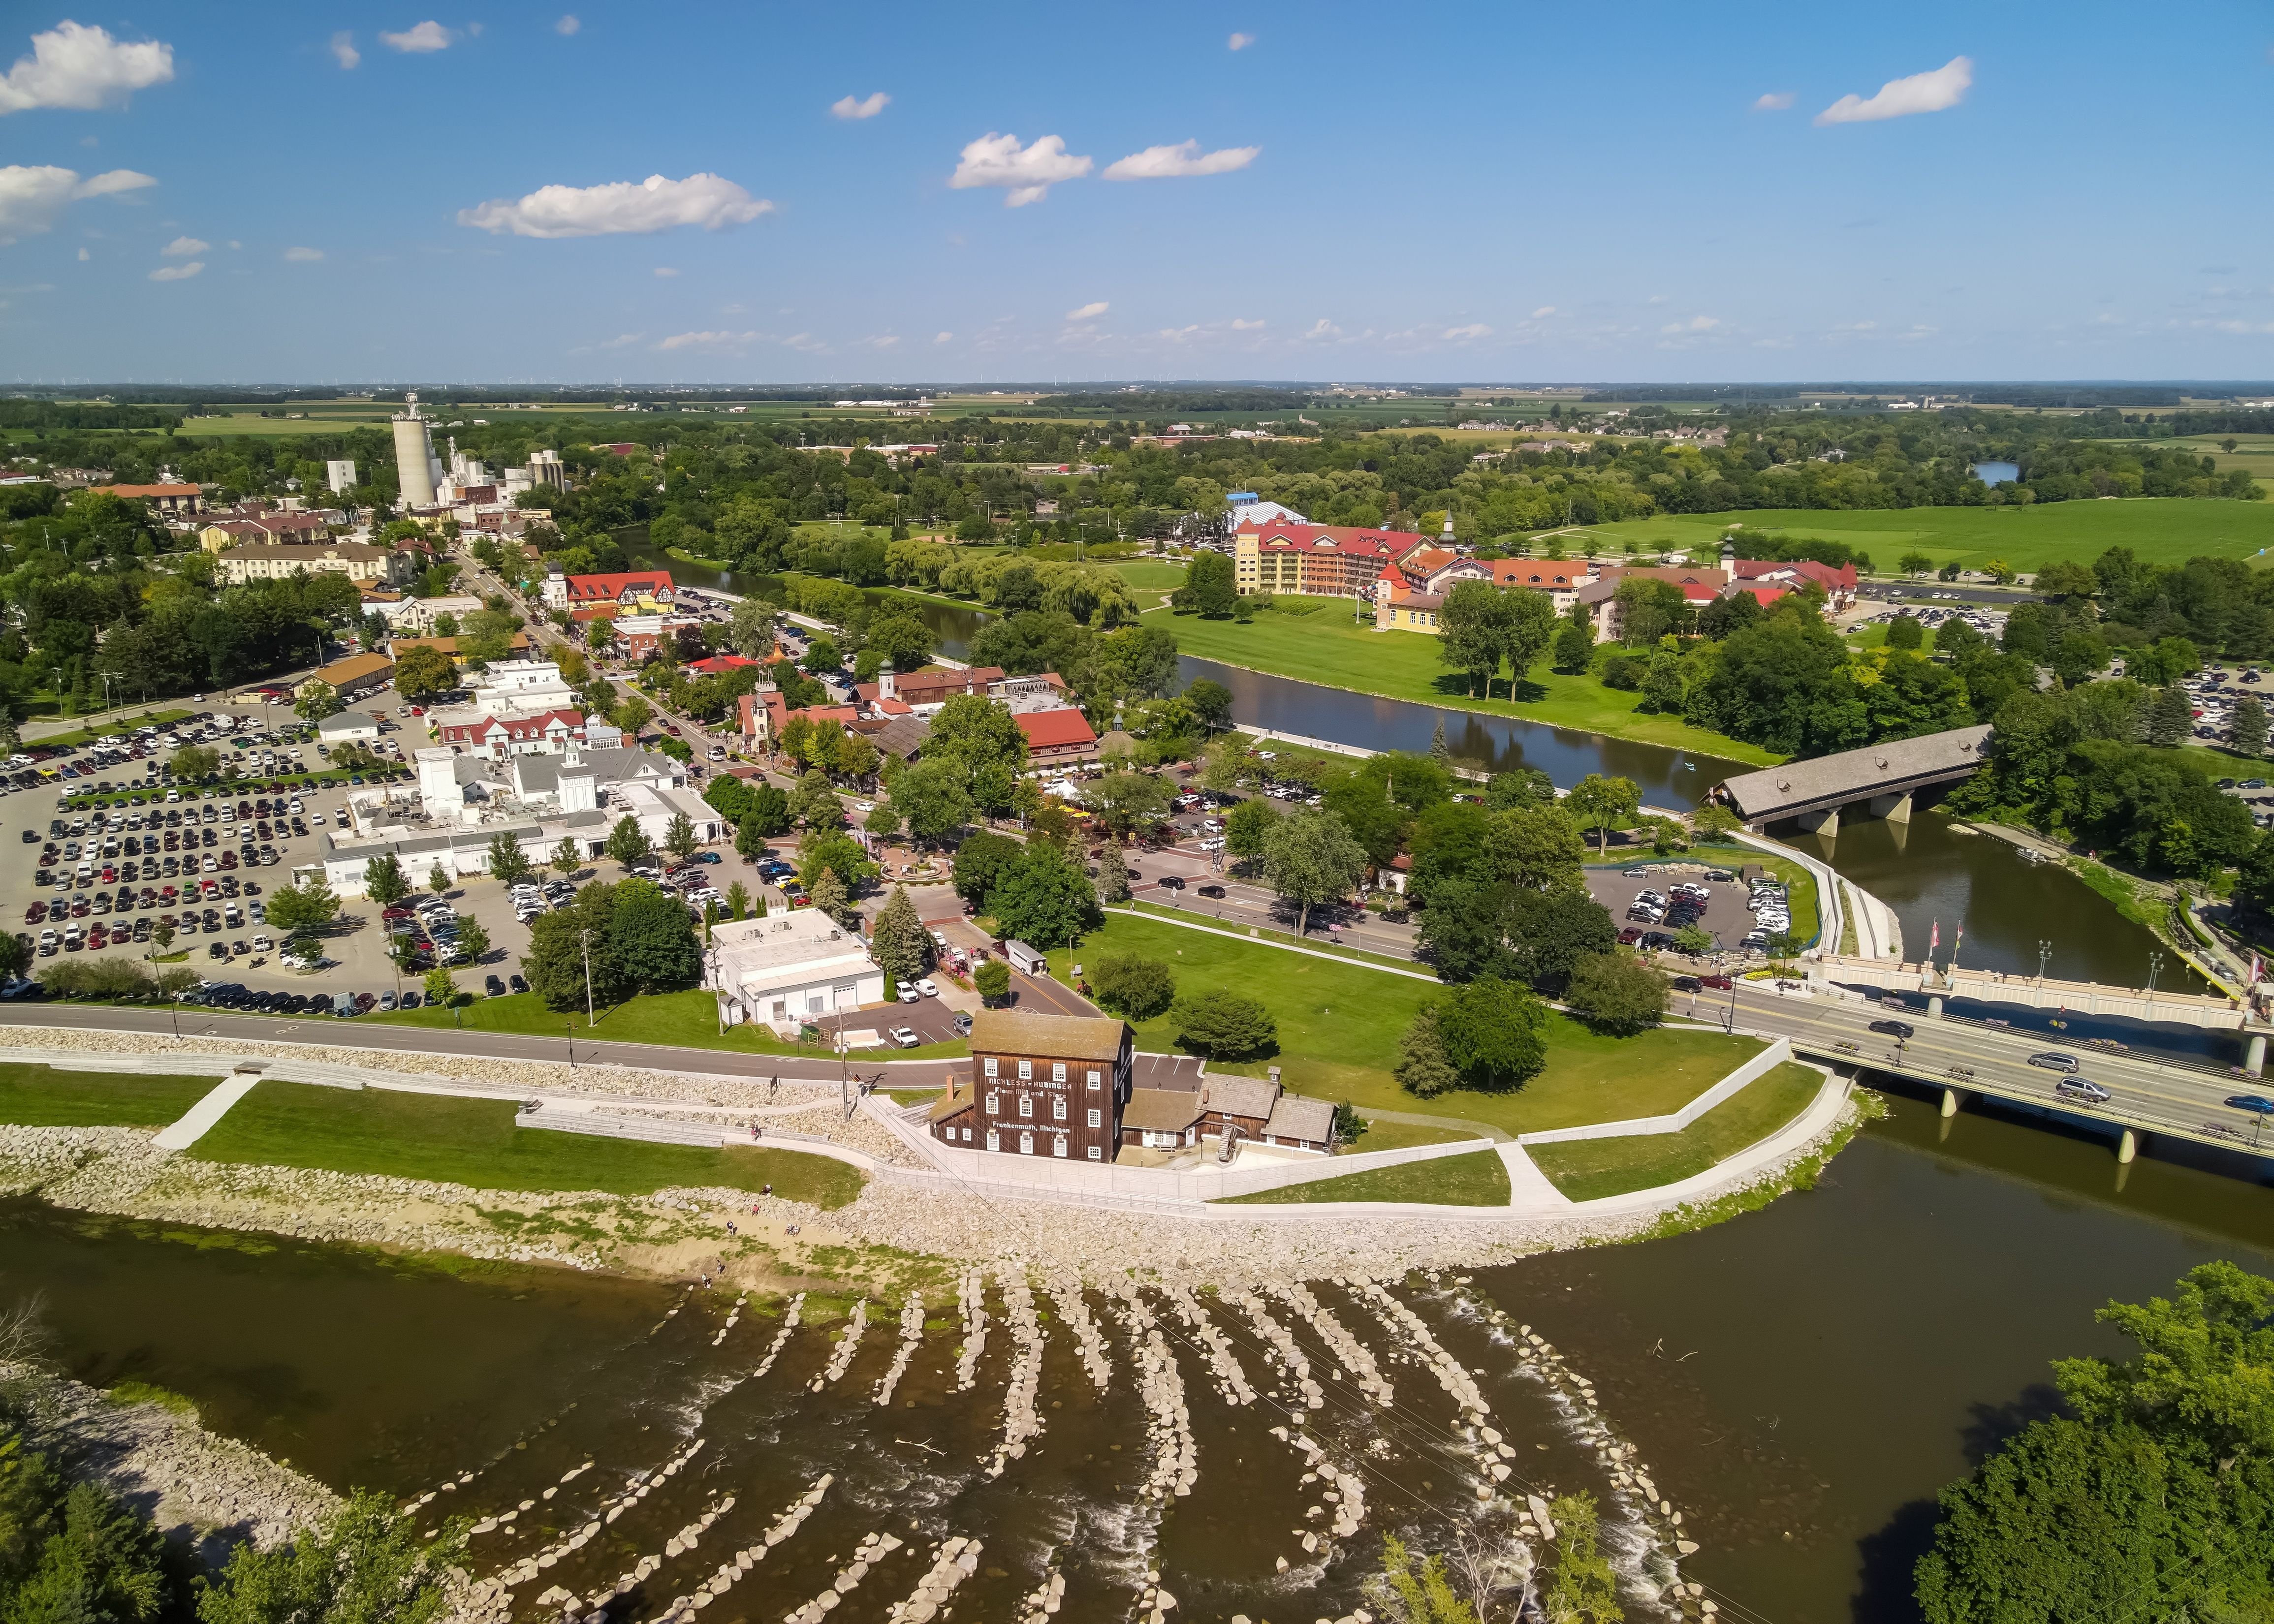 Aerial view of Frankenmuth, a city known for its Bavarian-style architecture.